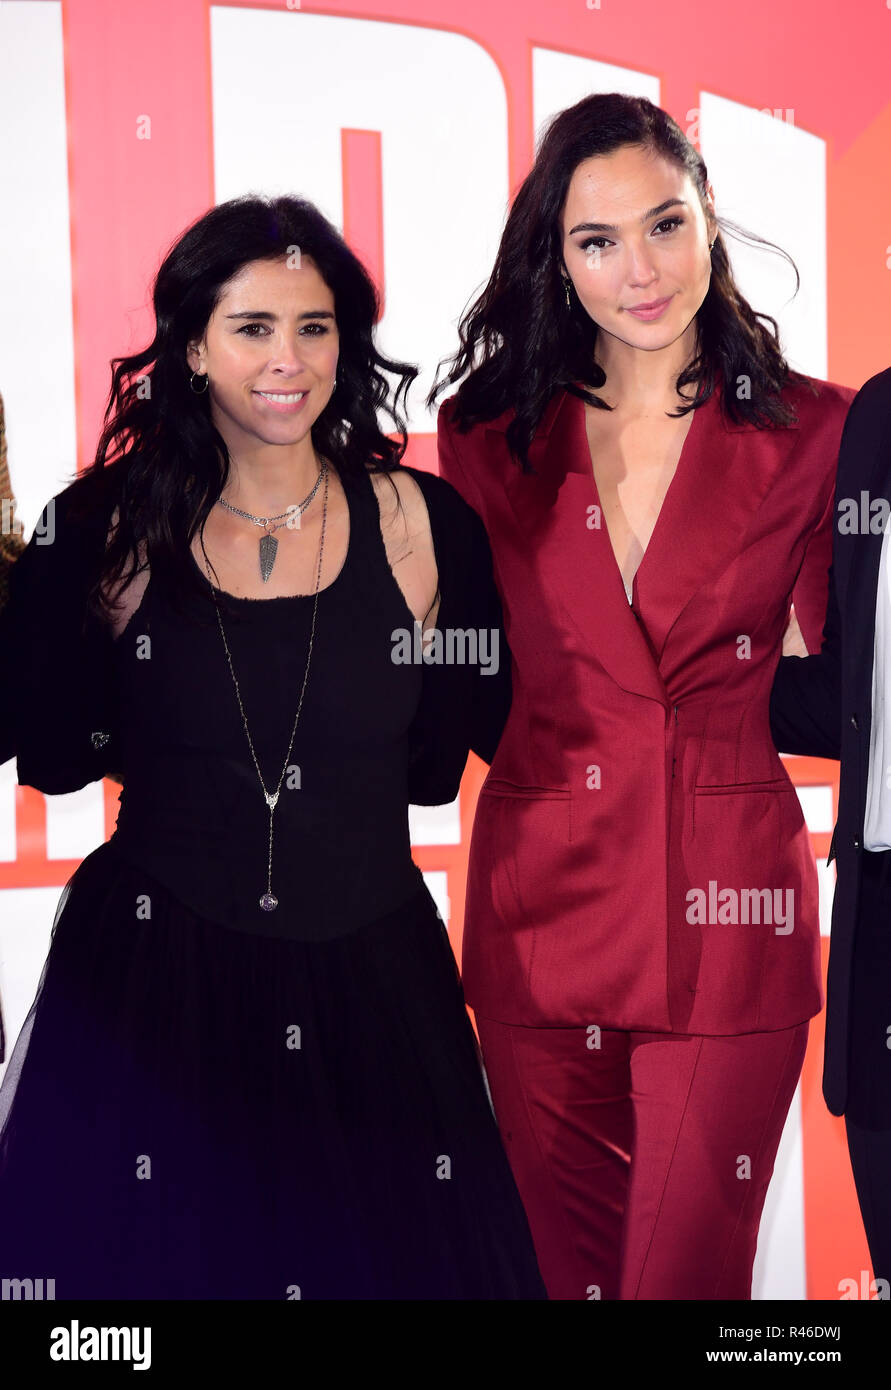 Sarah Silverman (left) and Gal Gadot attending the Ralph Breaks the Internet european premiere held at Curzon Mayfair, London. Stock Photo